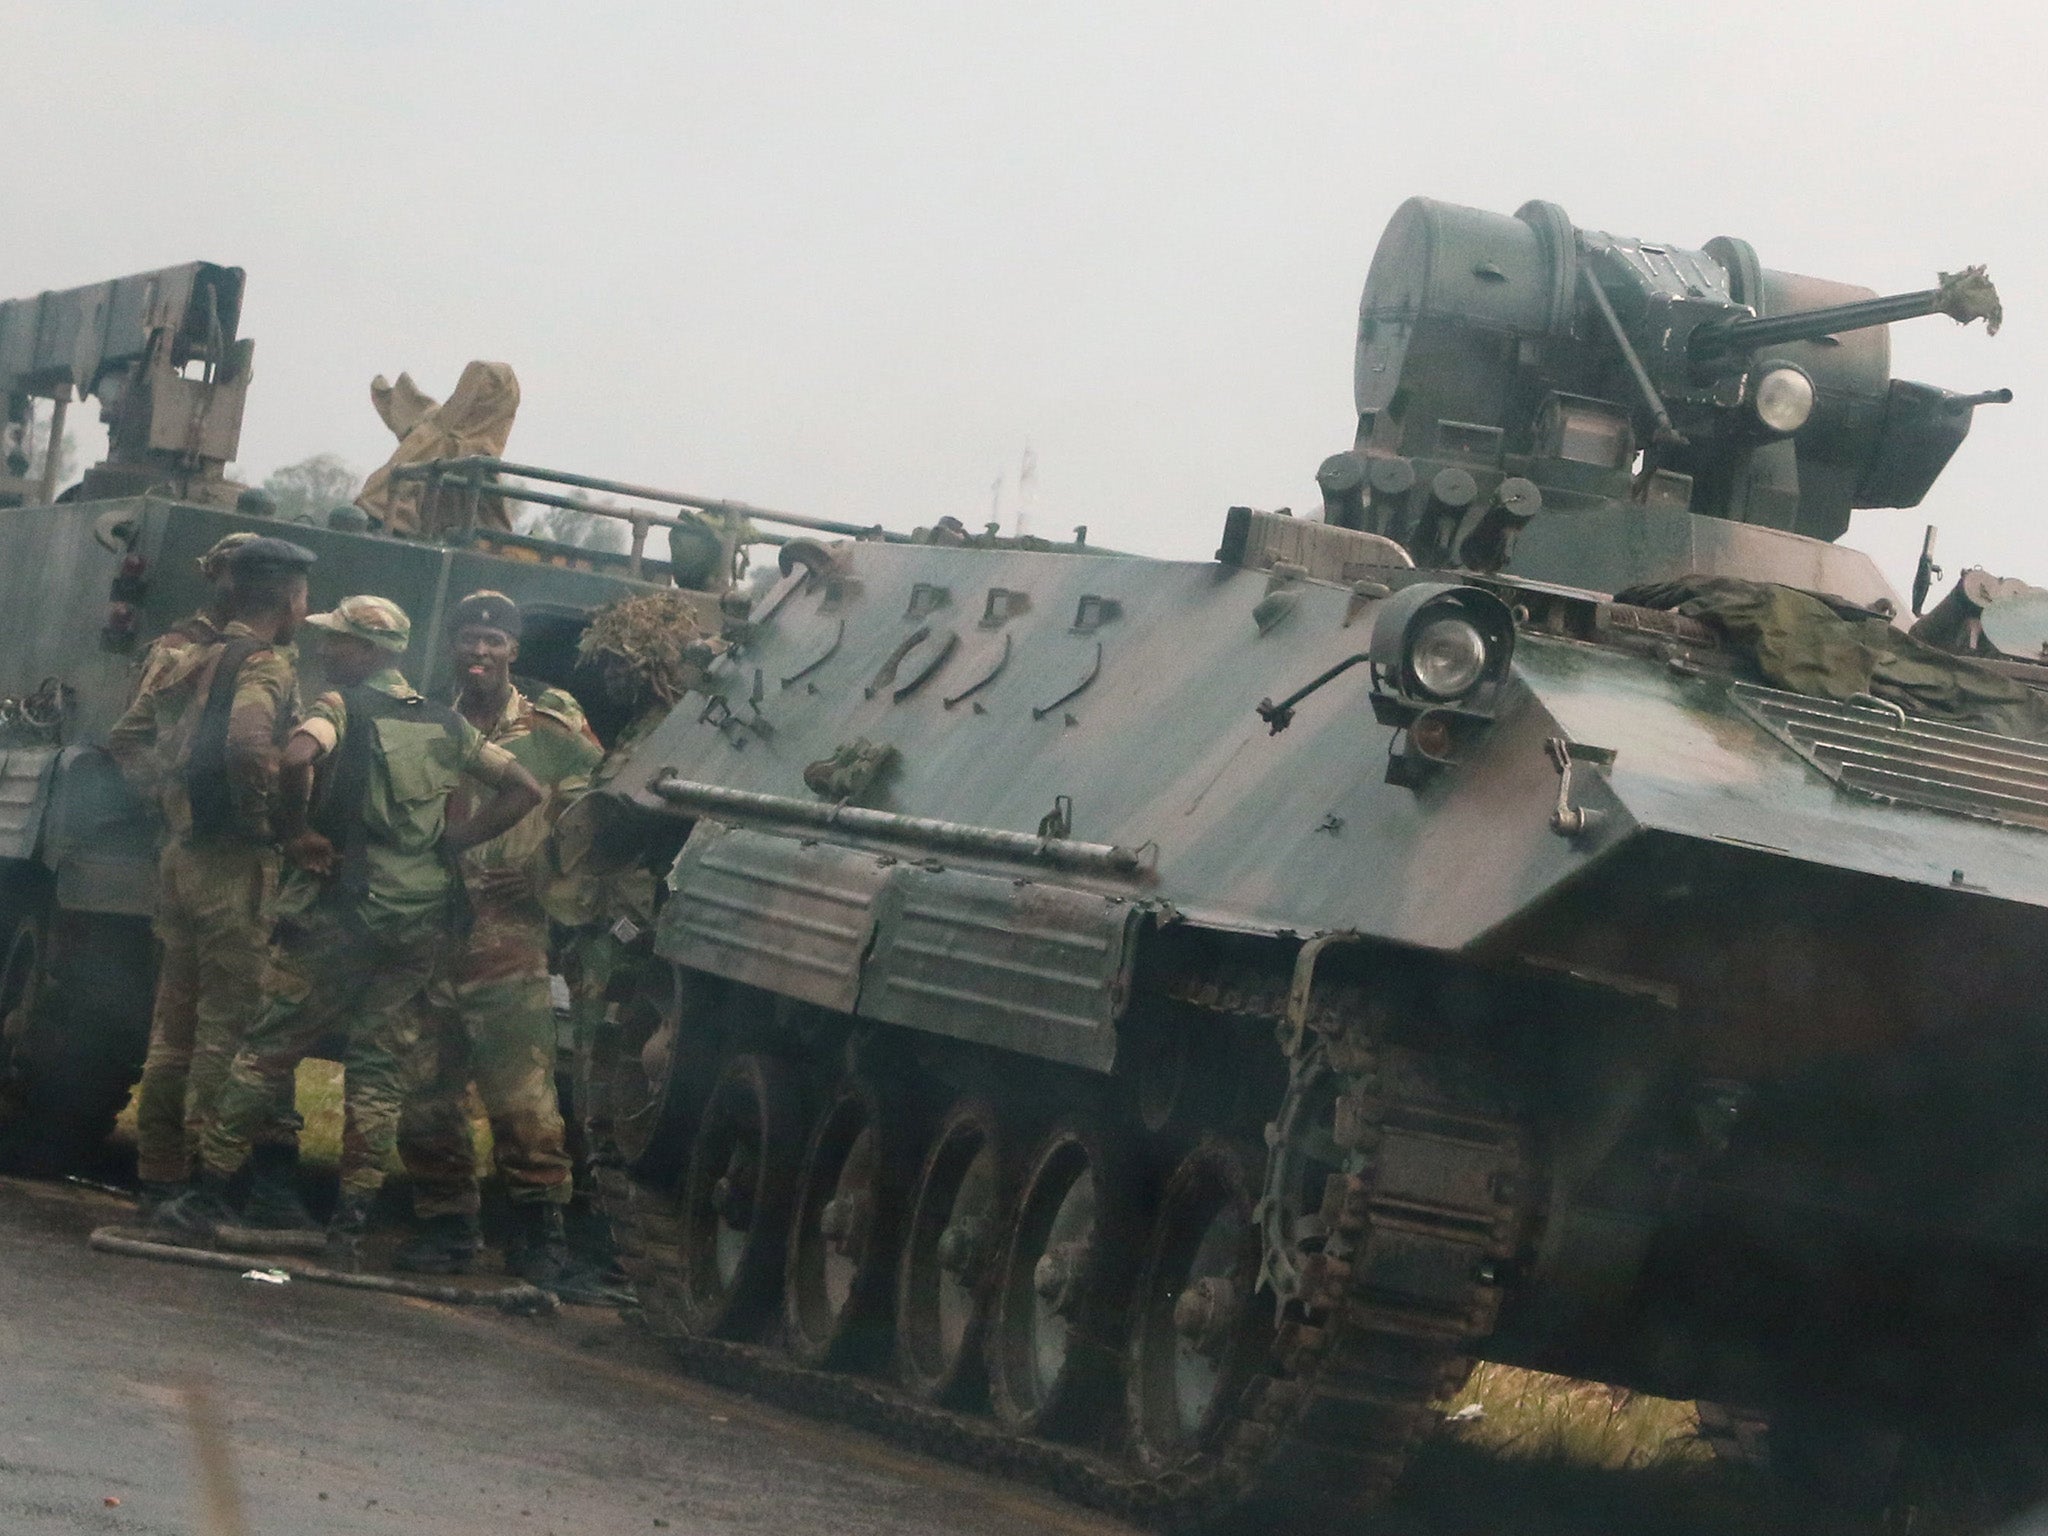 Soldiers stand beside military vehicles just outside Zimbawe's capital Harare